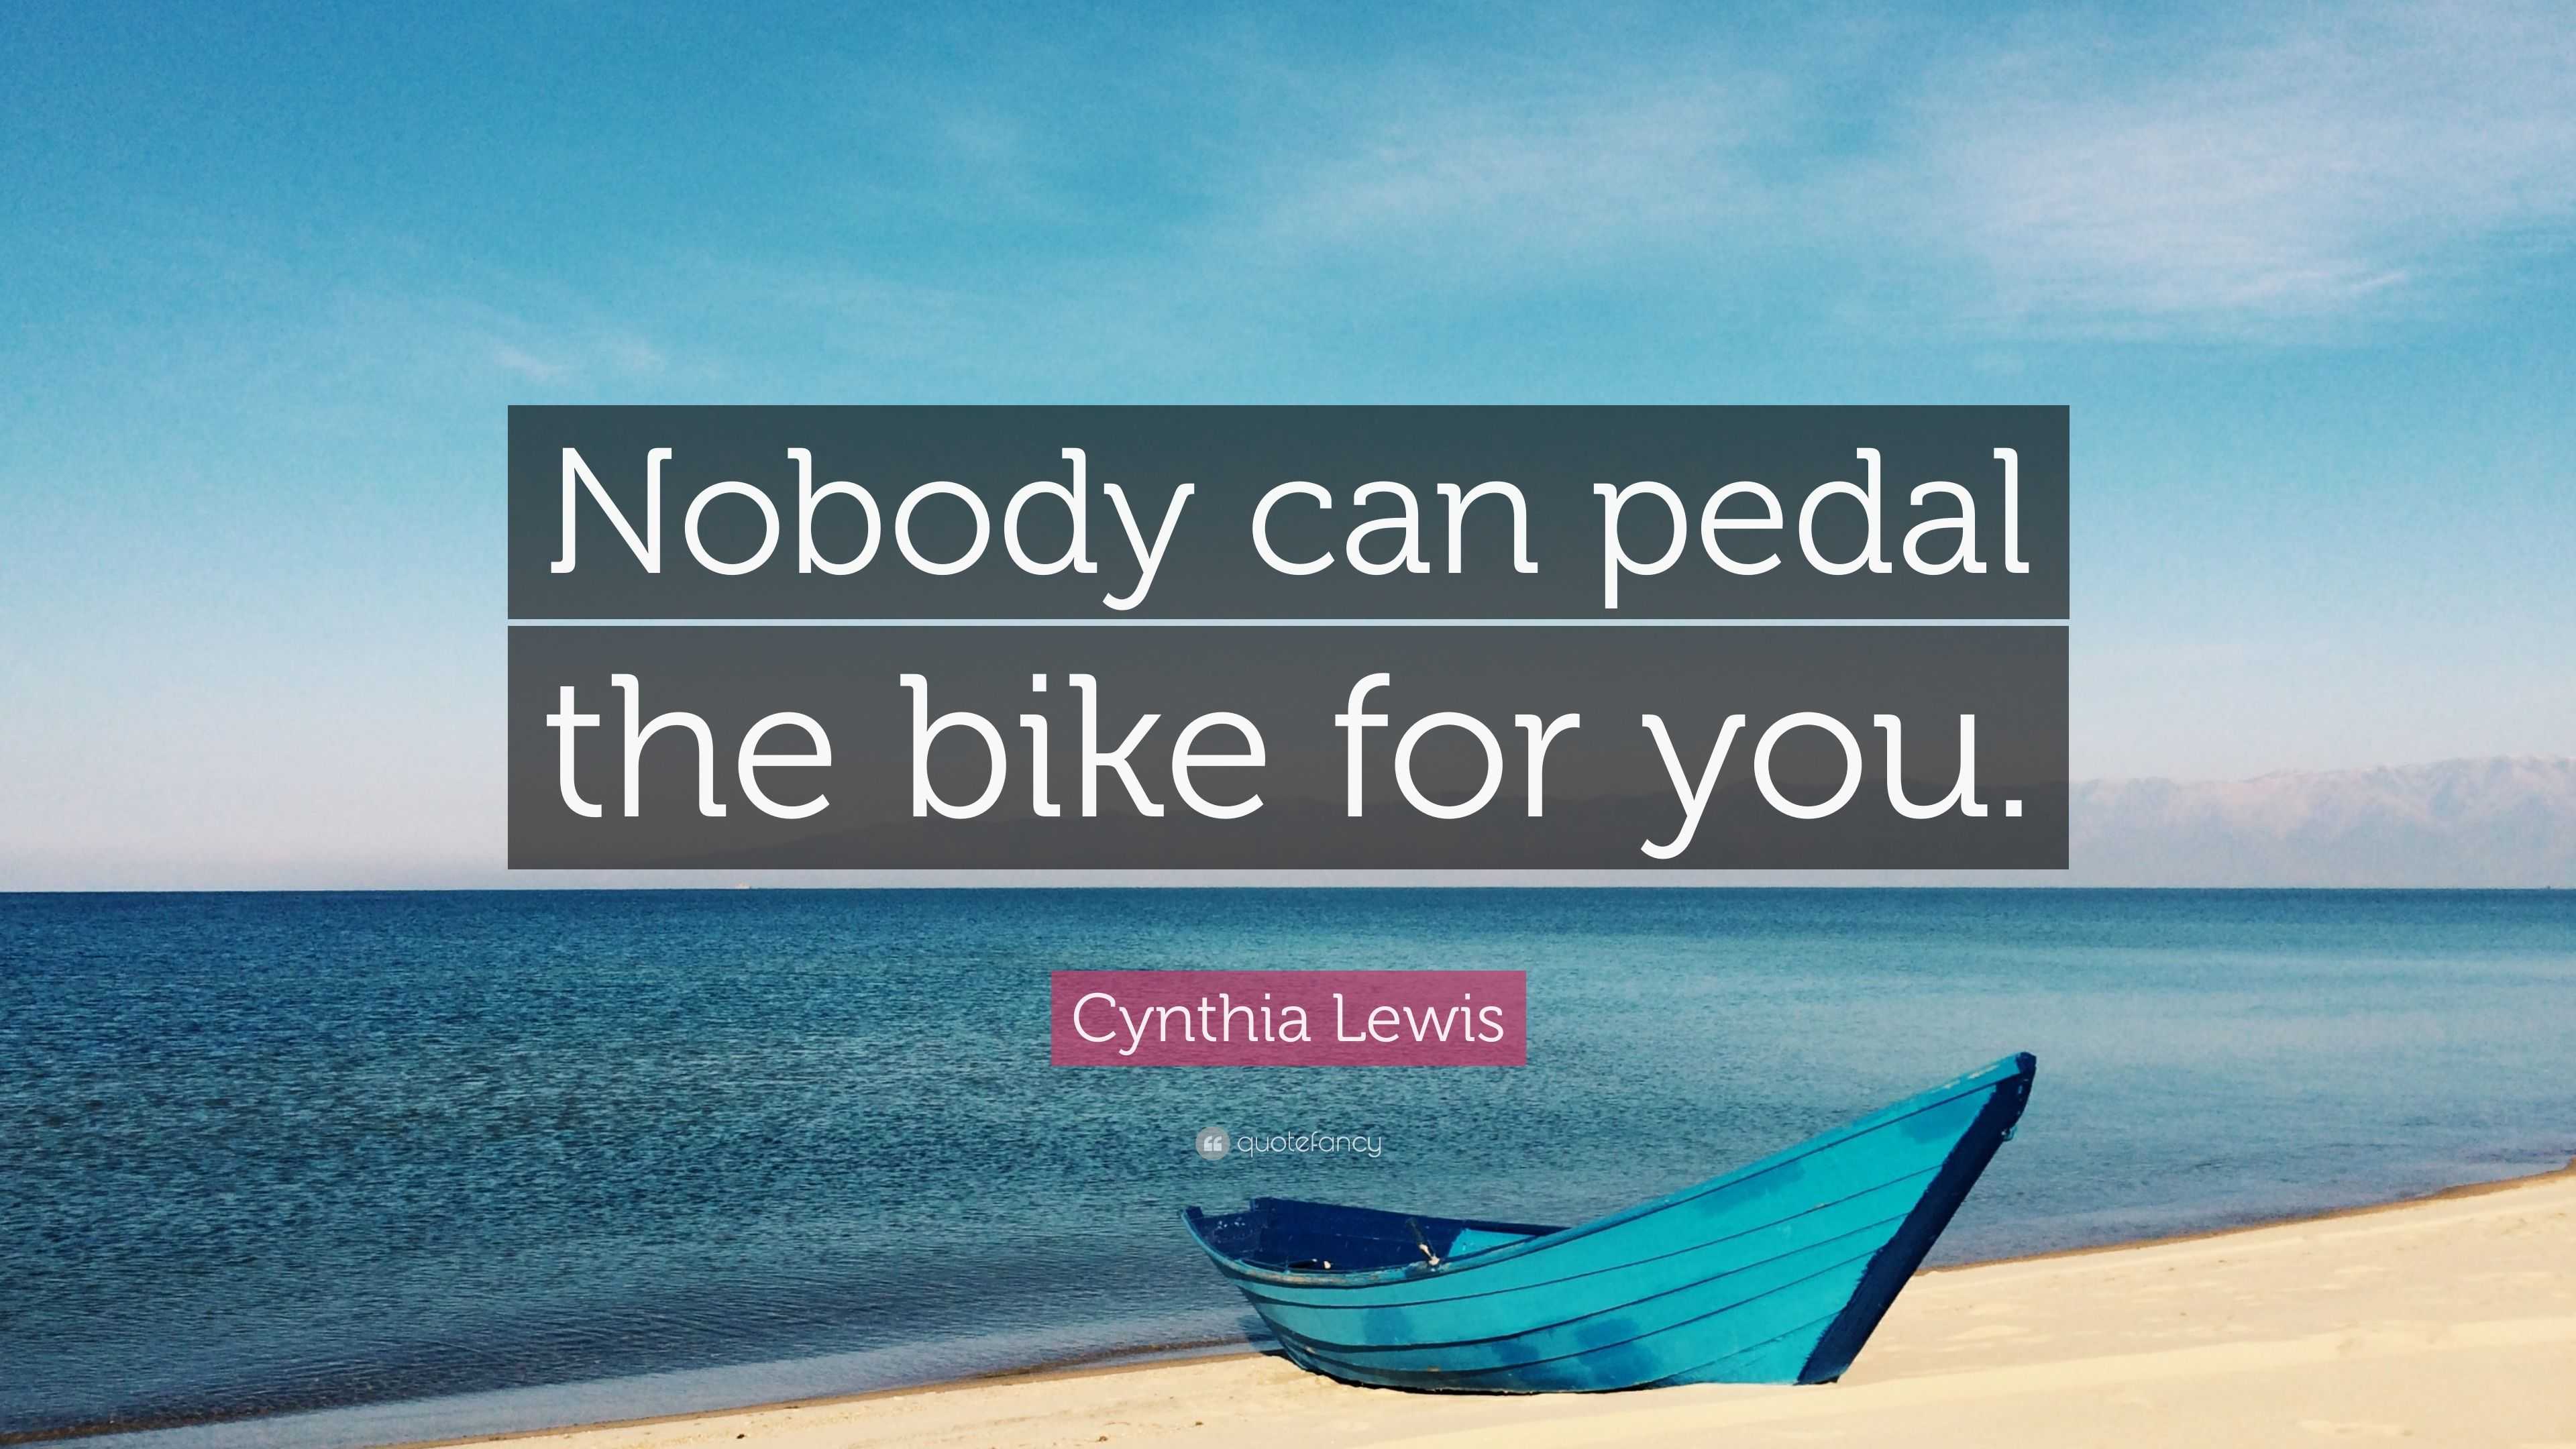 Cynthia Lewis Quote: “Nobody can pedal the bike for you.” (9 wallpapers